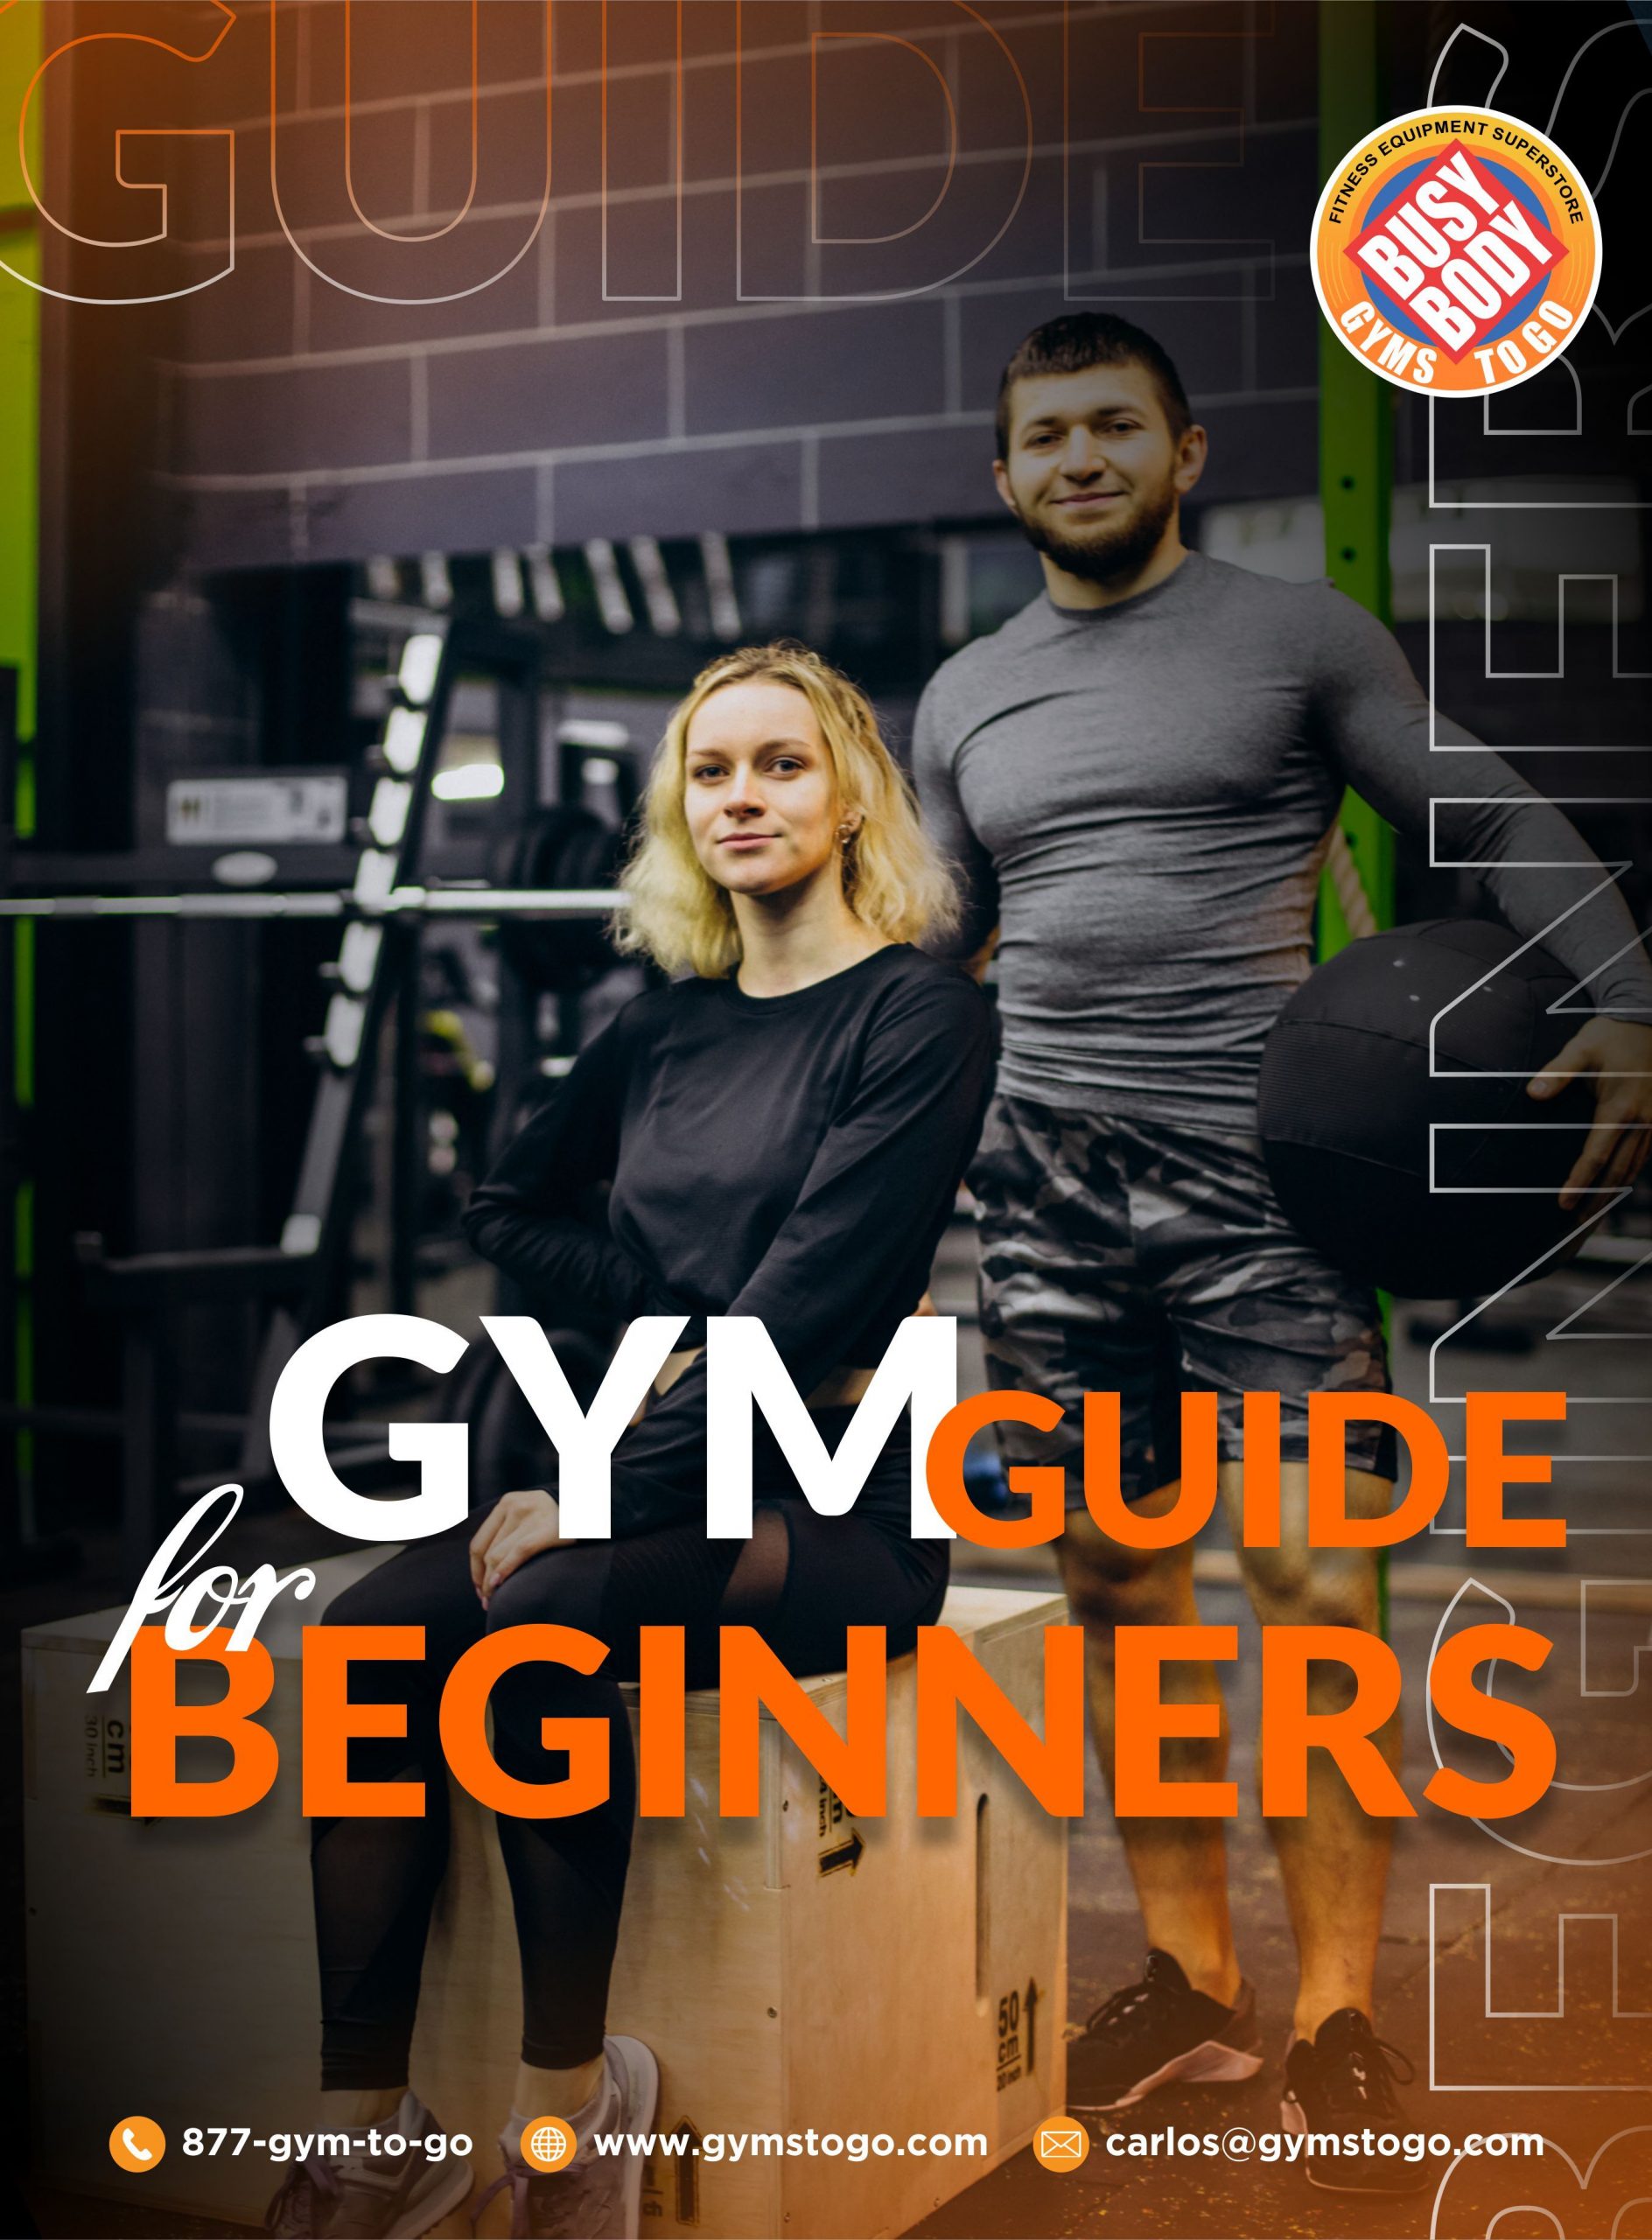 Gym Guide for Beginners